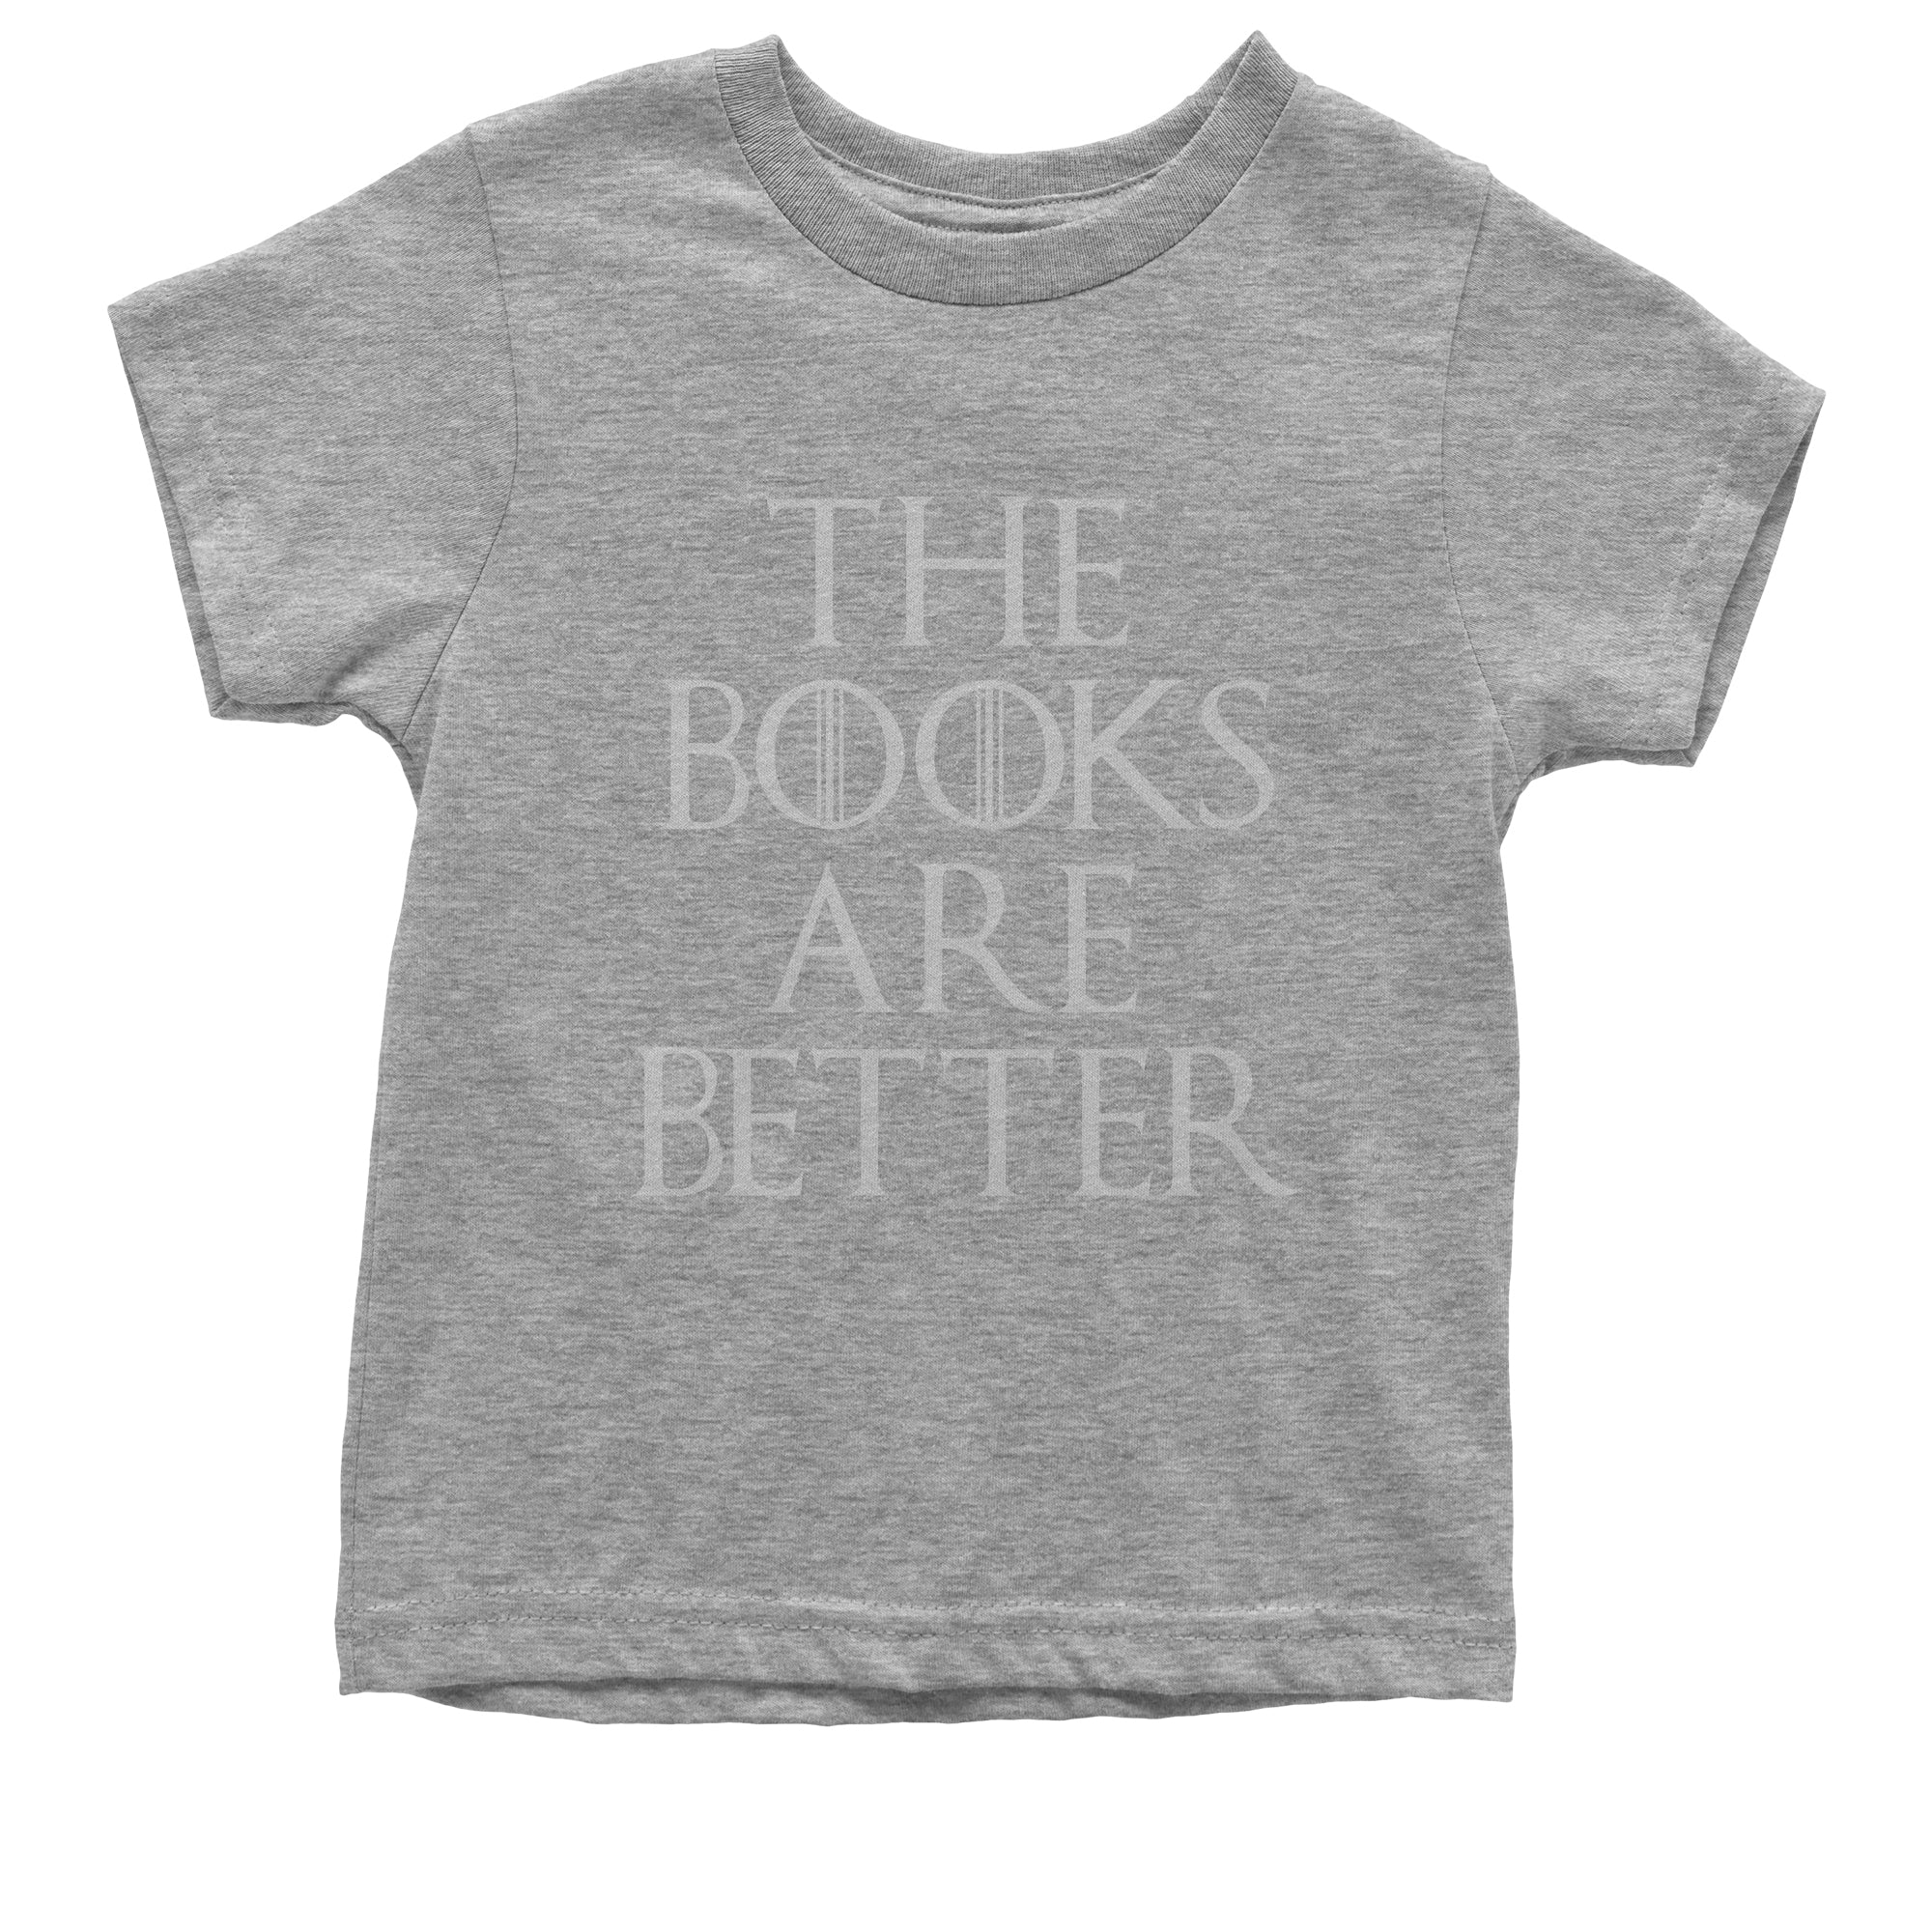 The Books are Better Gamers of Thrones Kid's T-Shirt